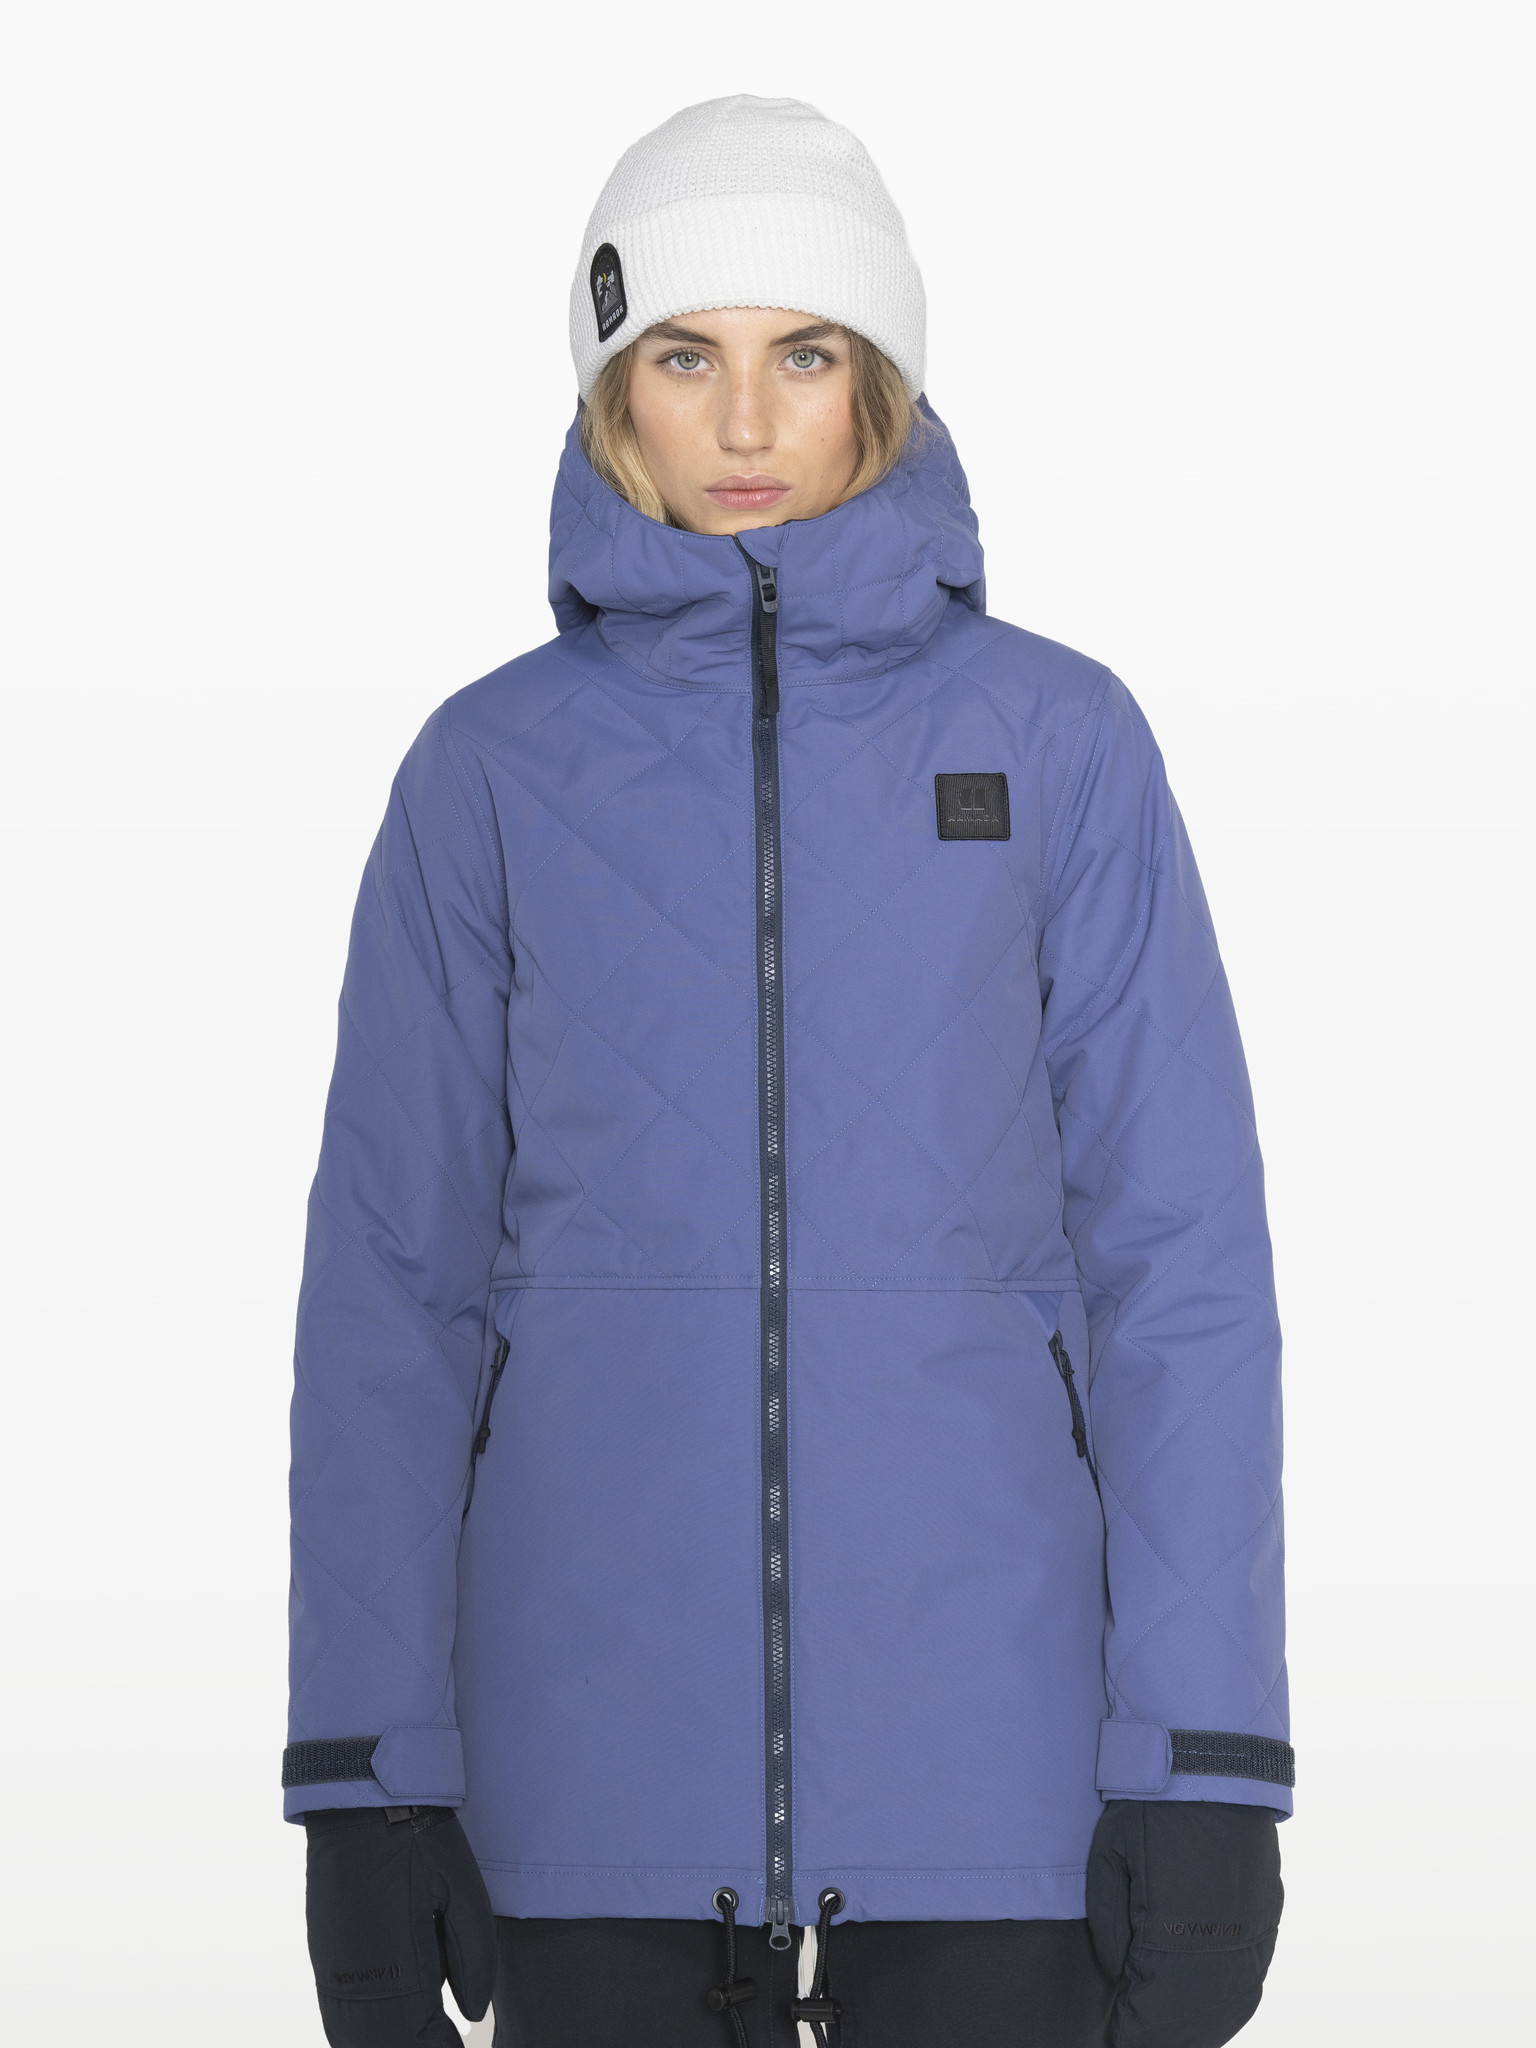 Sterlet Insulated Jacket-1